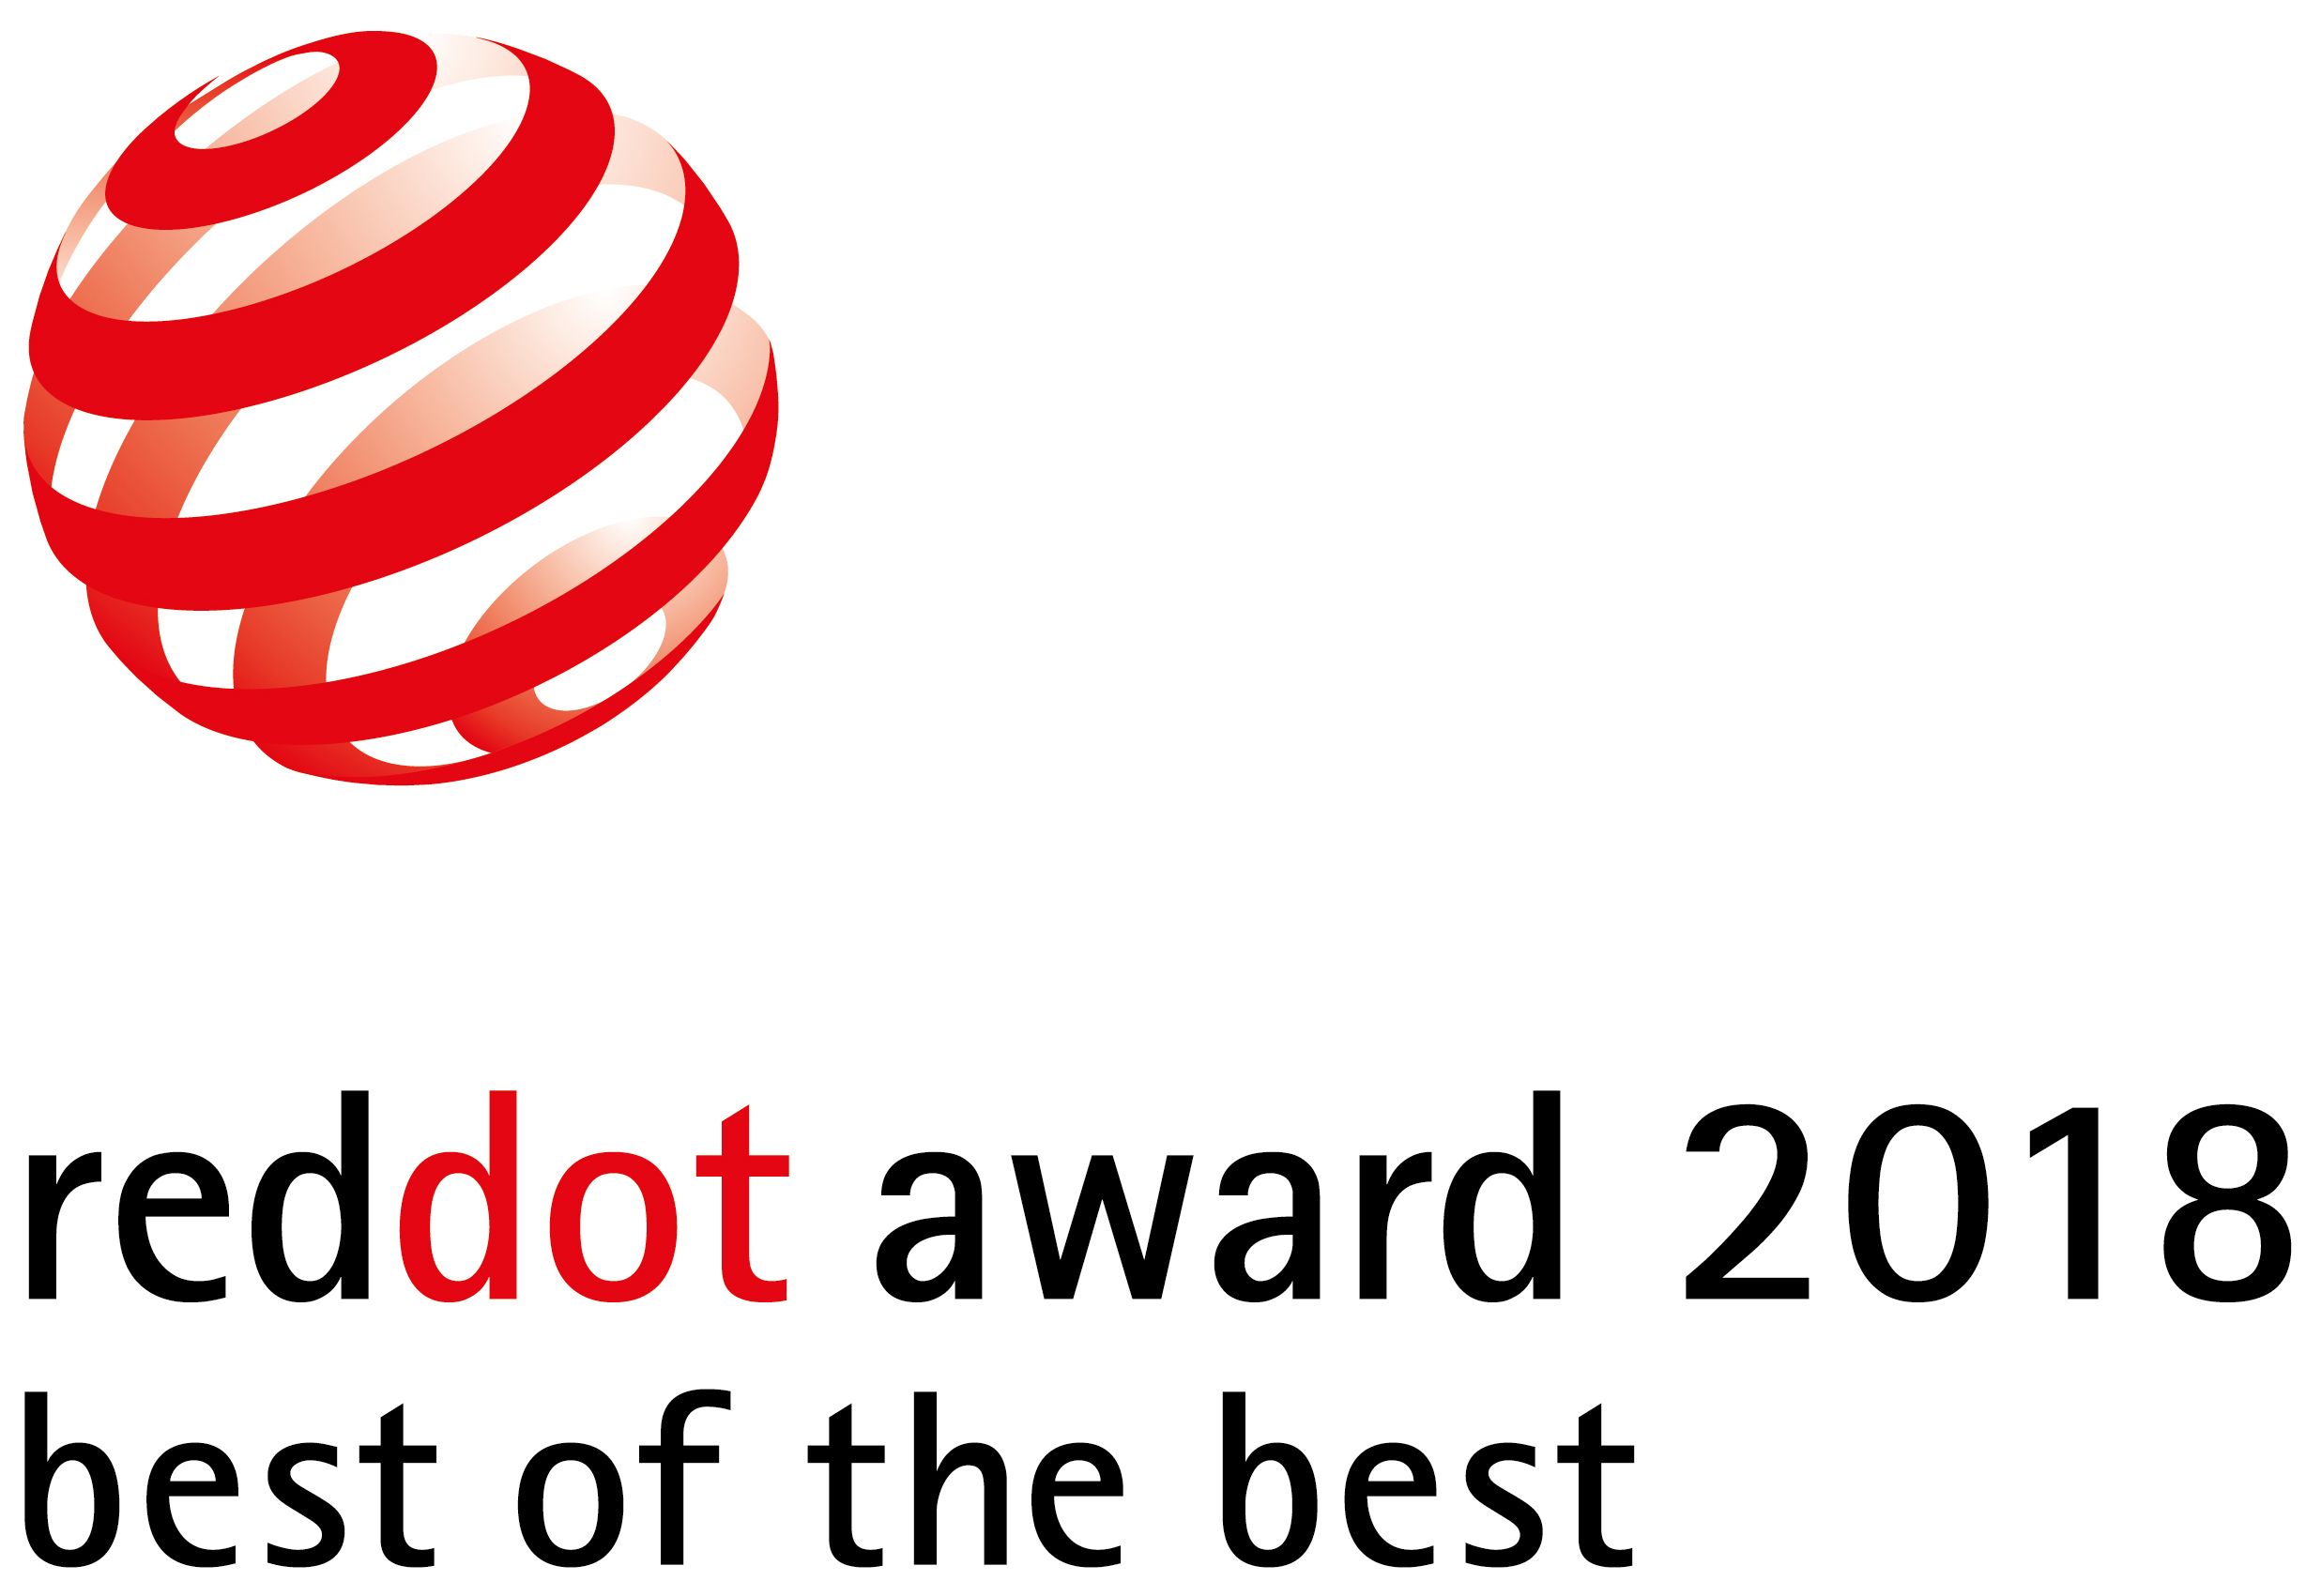 Red Dot “Best of the Best” Award 2018